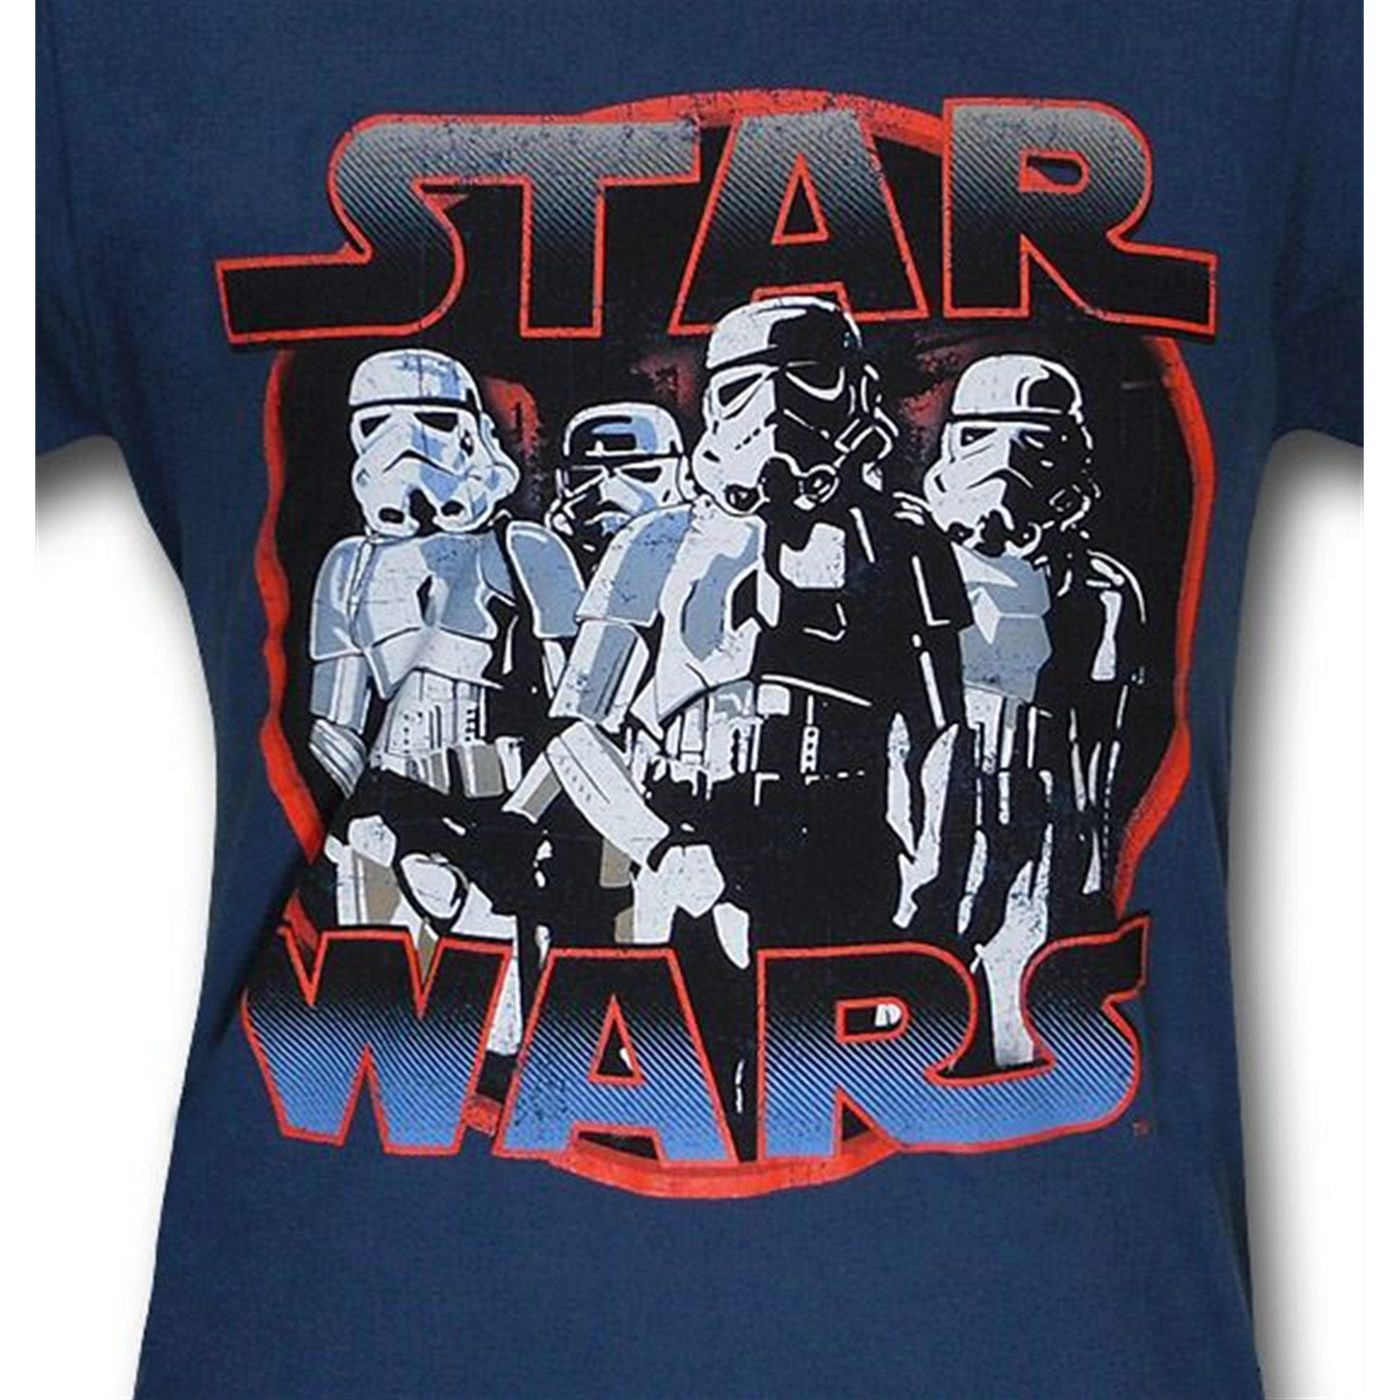 Star Wars Stormtroopers Four 30 Single T-Shirt